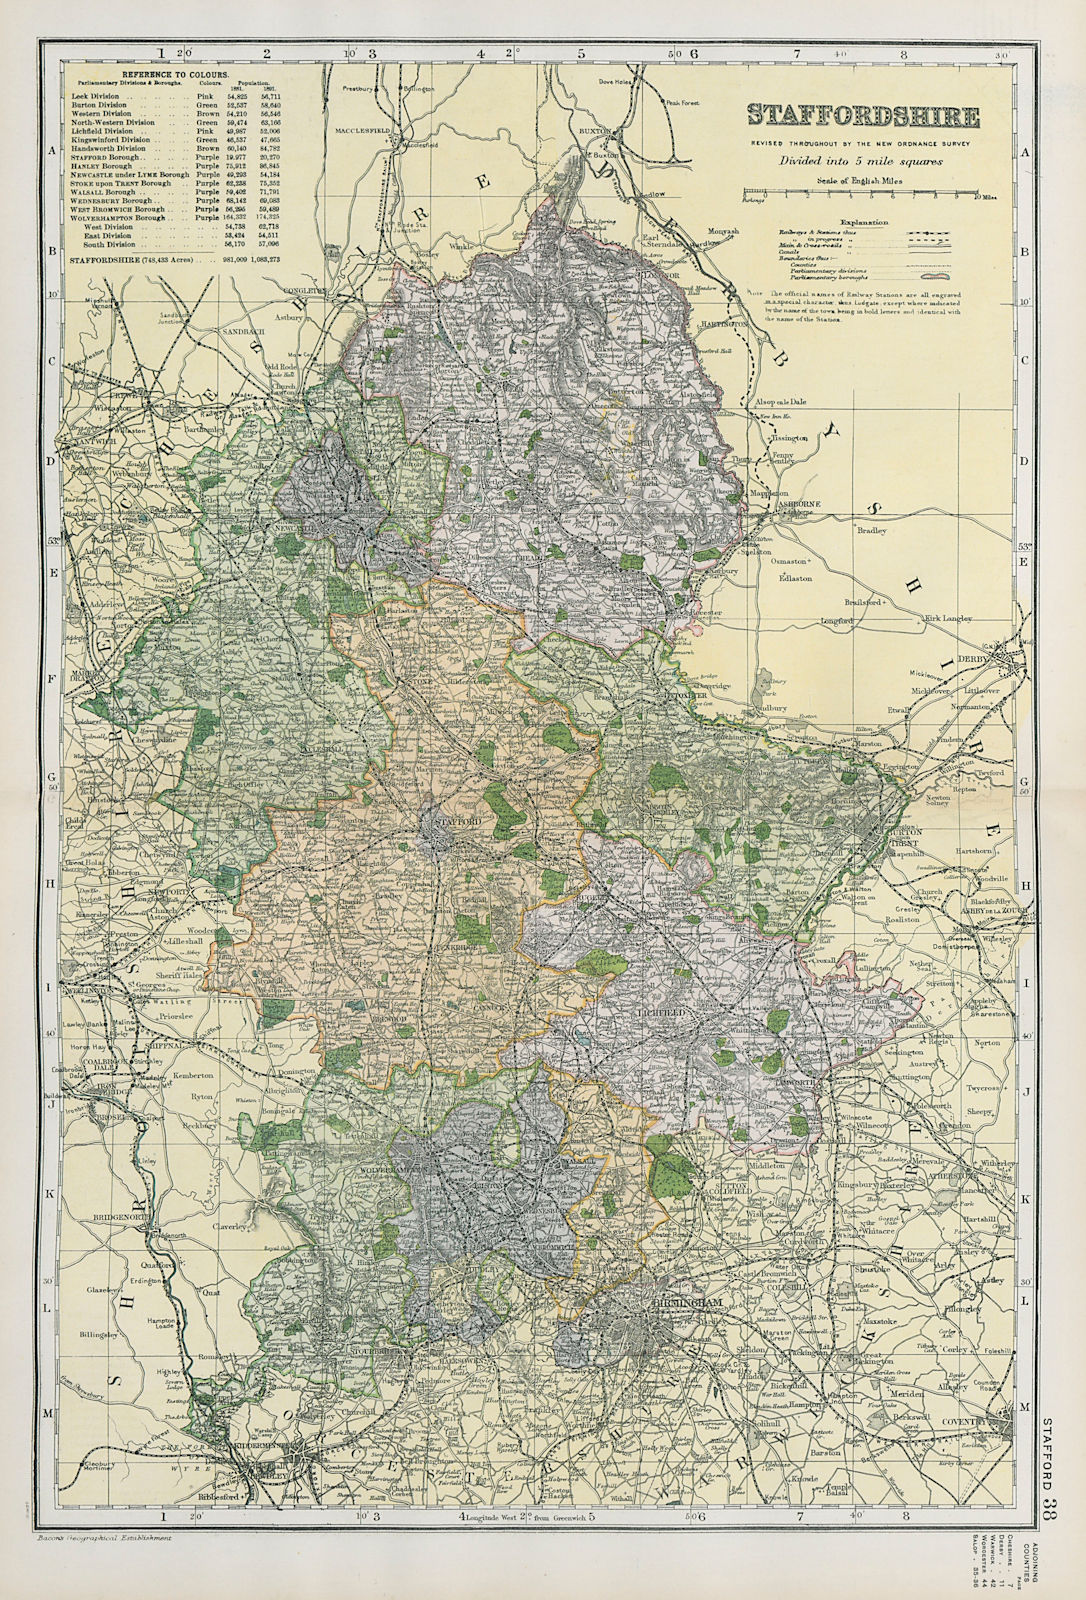 Associate Product STAFFORDSHIRE. Showing Parliamentary divisions, boroughs & parks. BACON 1900 map